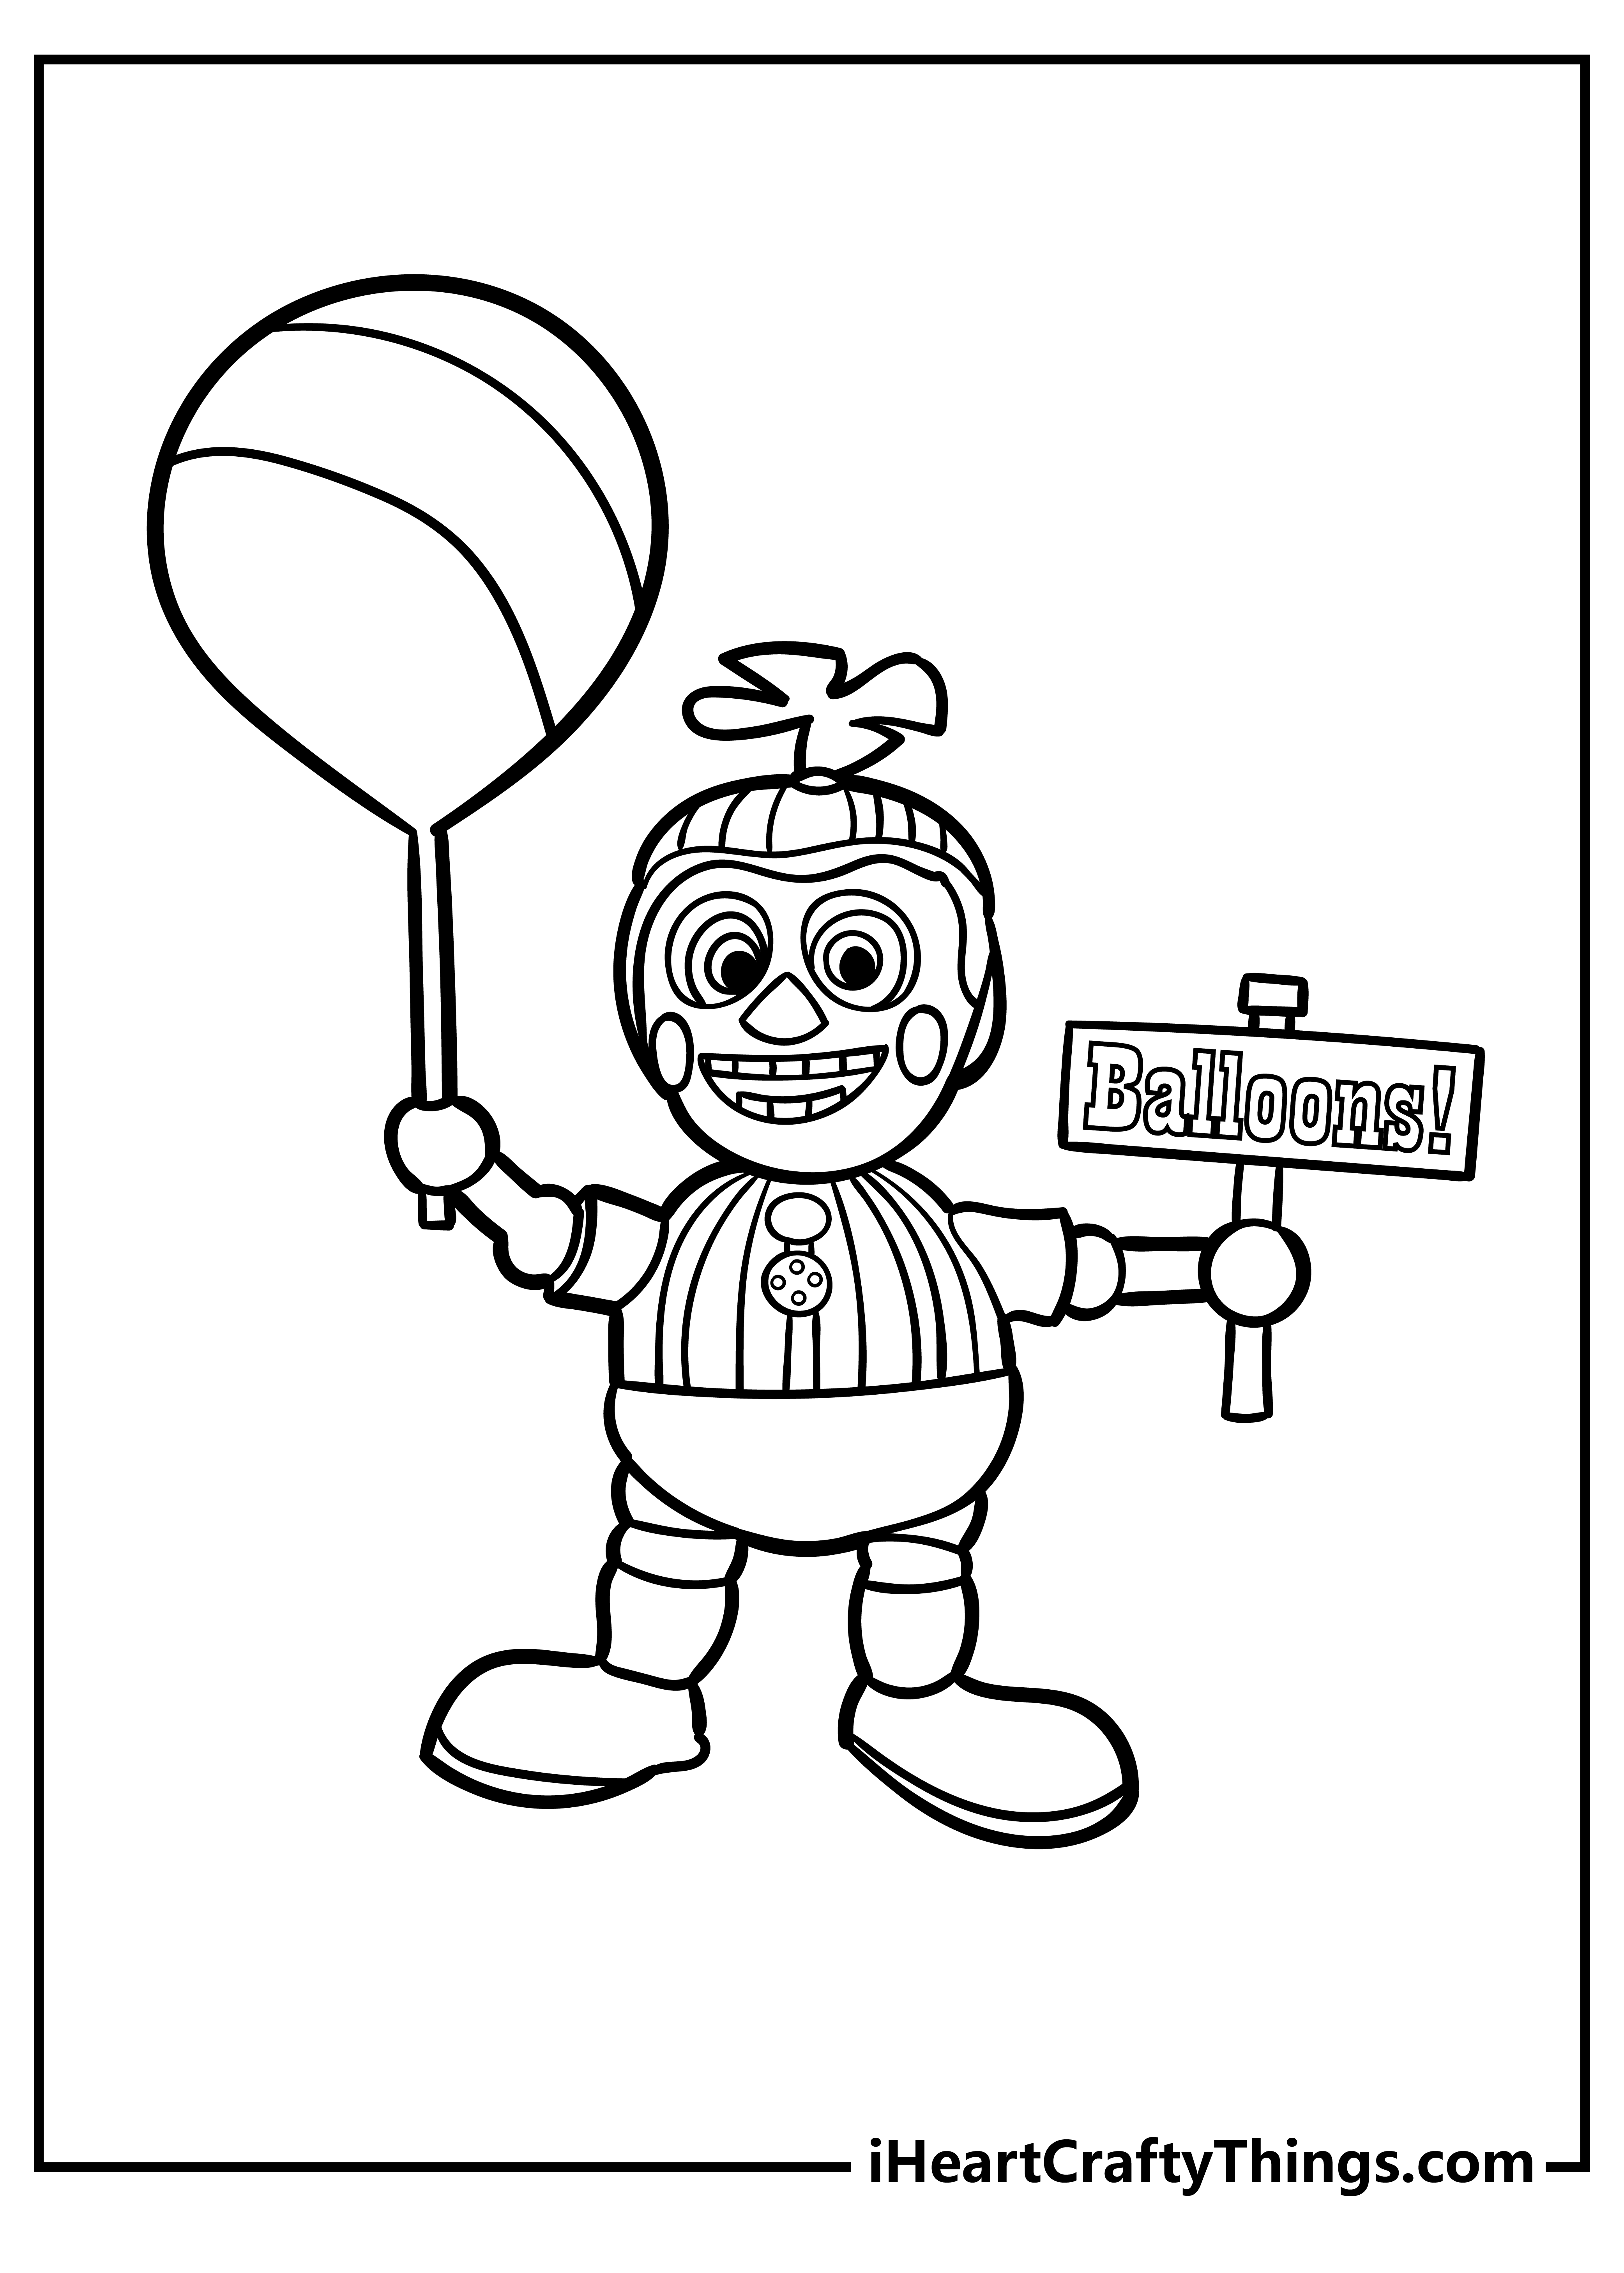 Five Nights At Freddy’s Coloring Book for adults free download